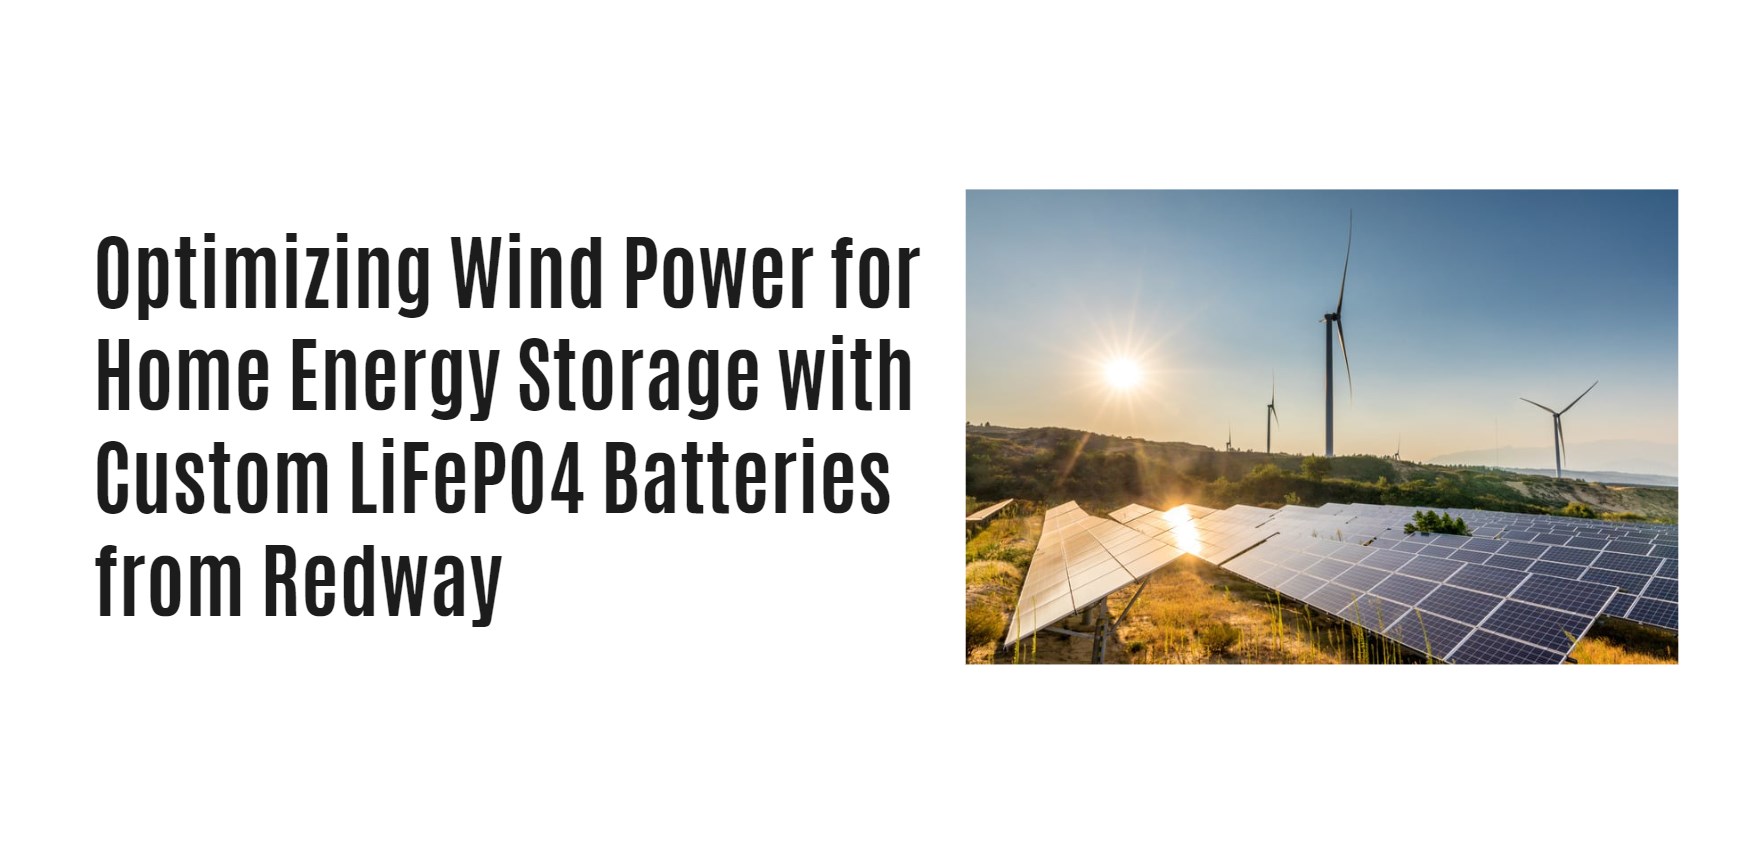 Optimizing Wind Power for Home Energy Storage with Custom LiFePO4 Batteries from Redway